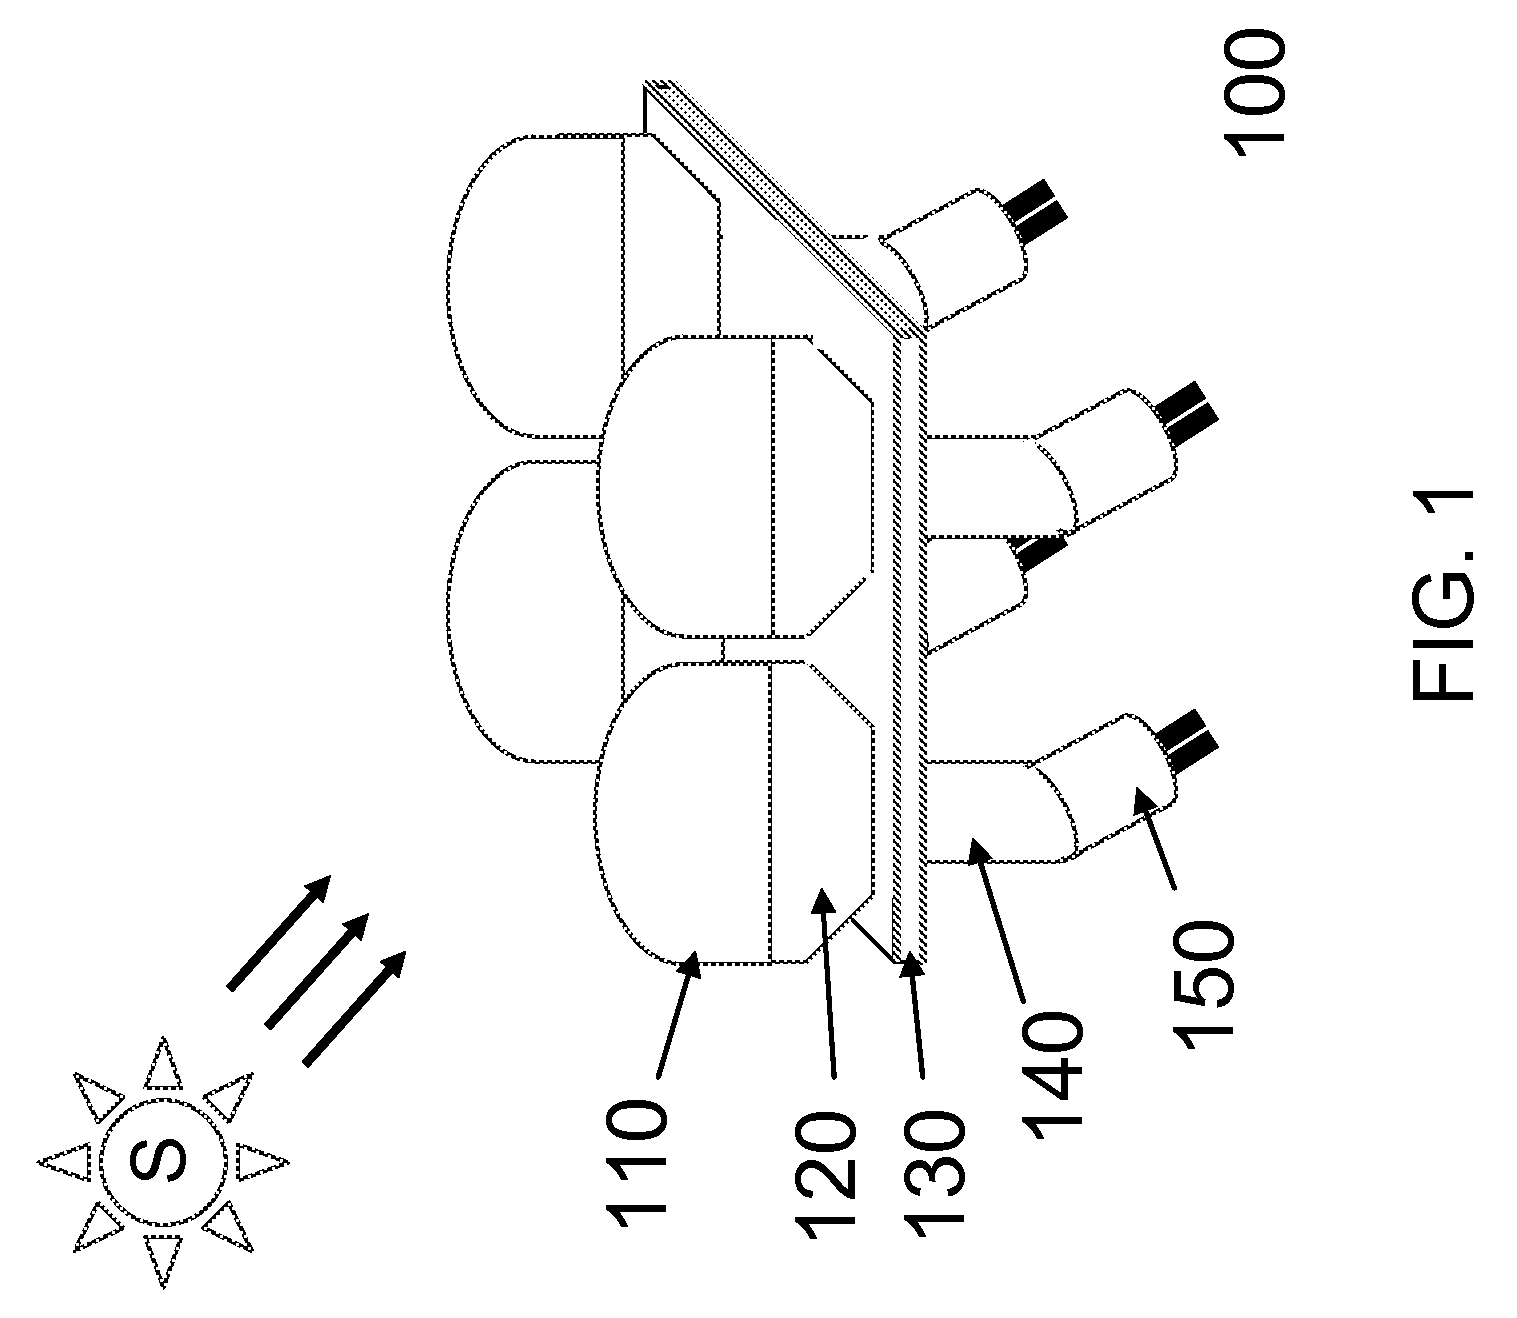 Solar-To-Electricity Conversion System Using Cascaded Architecture of Photovoltaic and Thermoelectric Devices